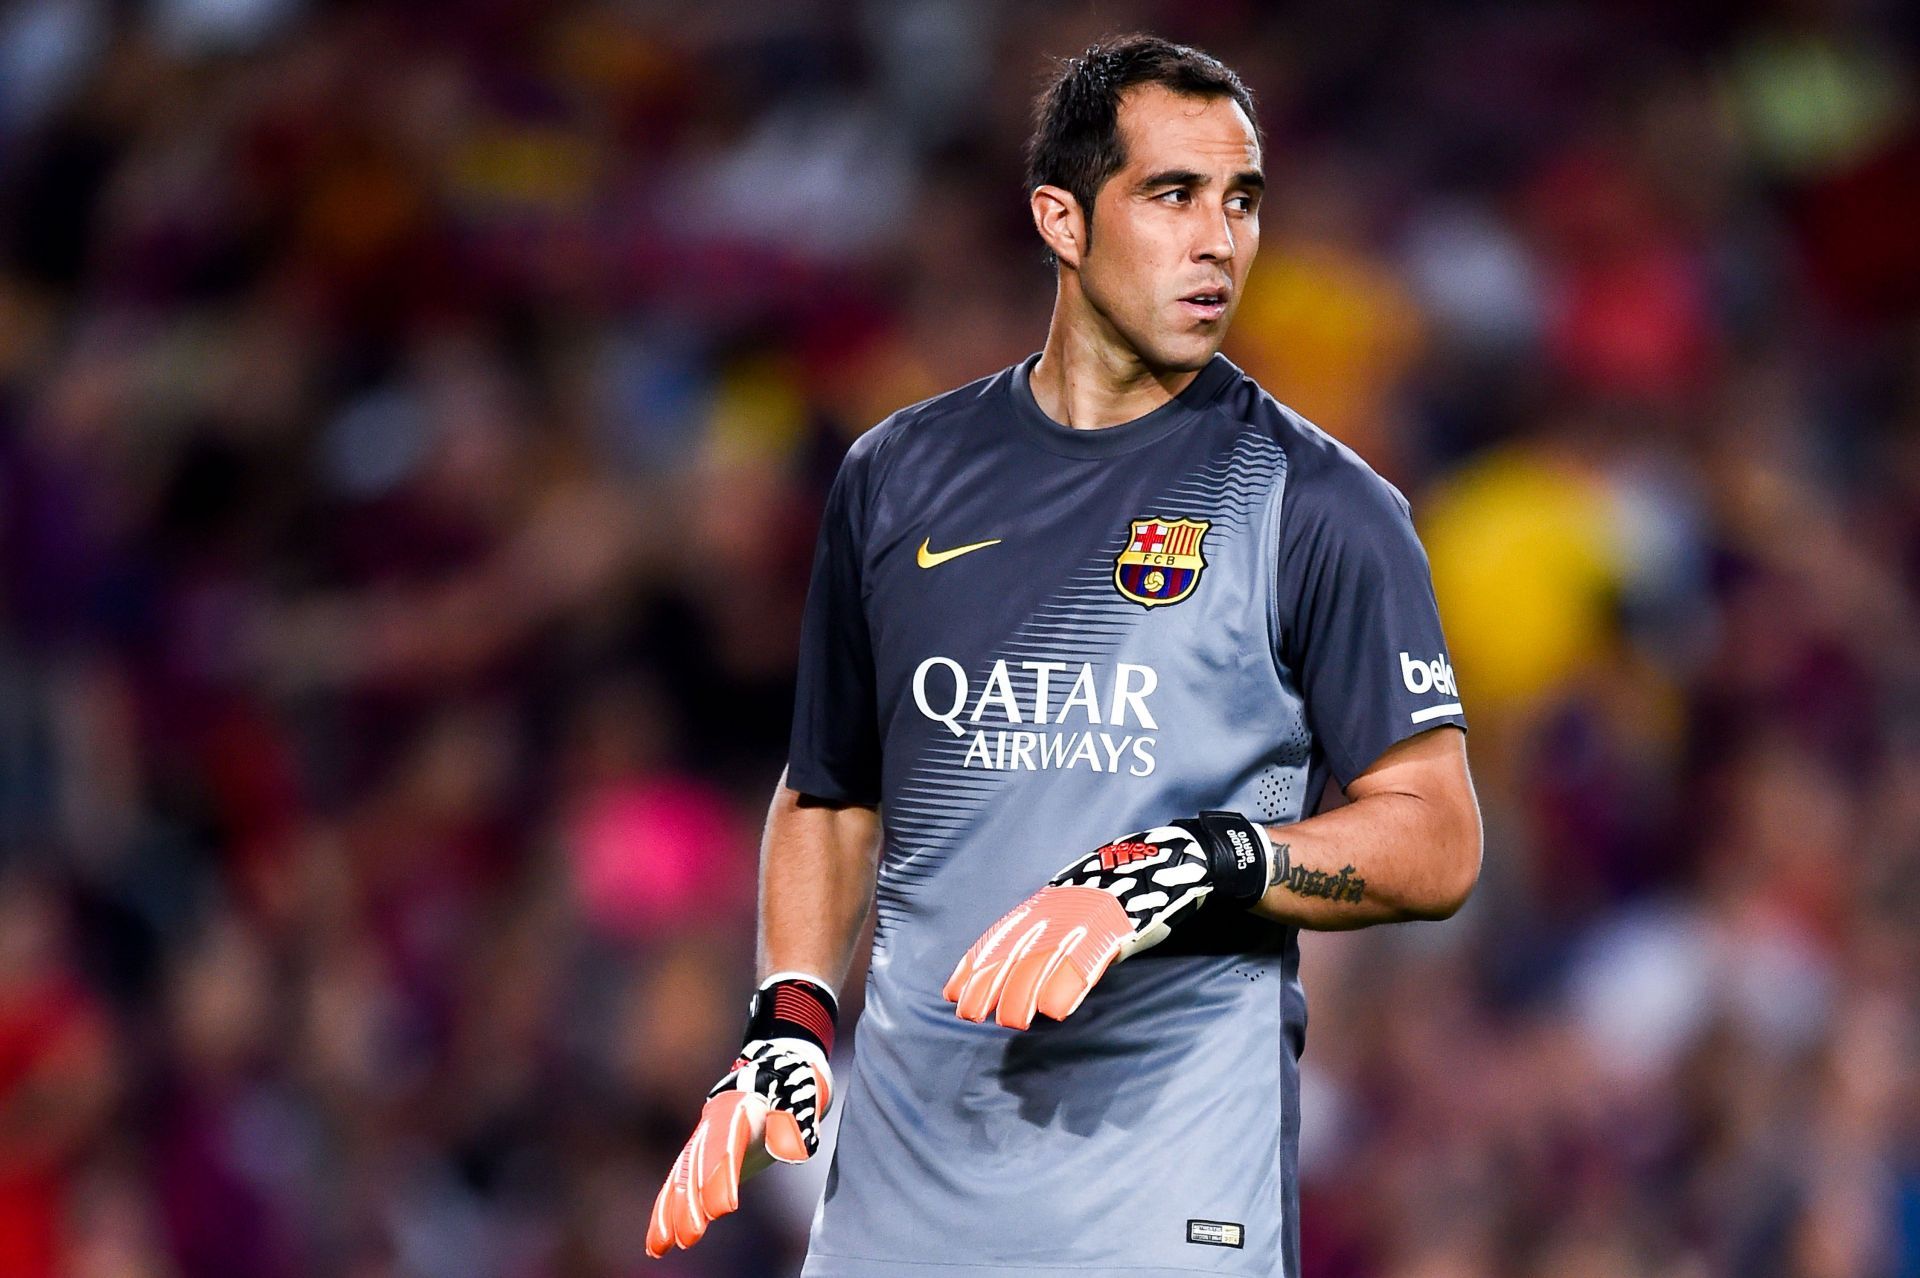 Claudio Bravo won the treble during his first season with Barcelona.